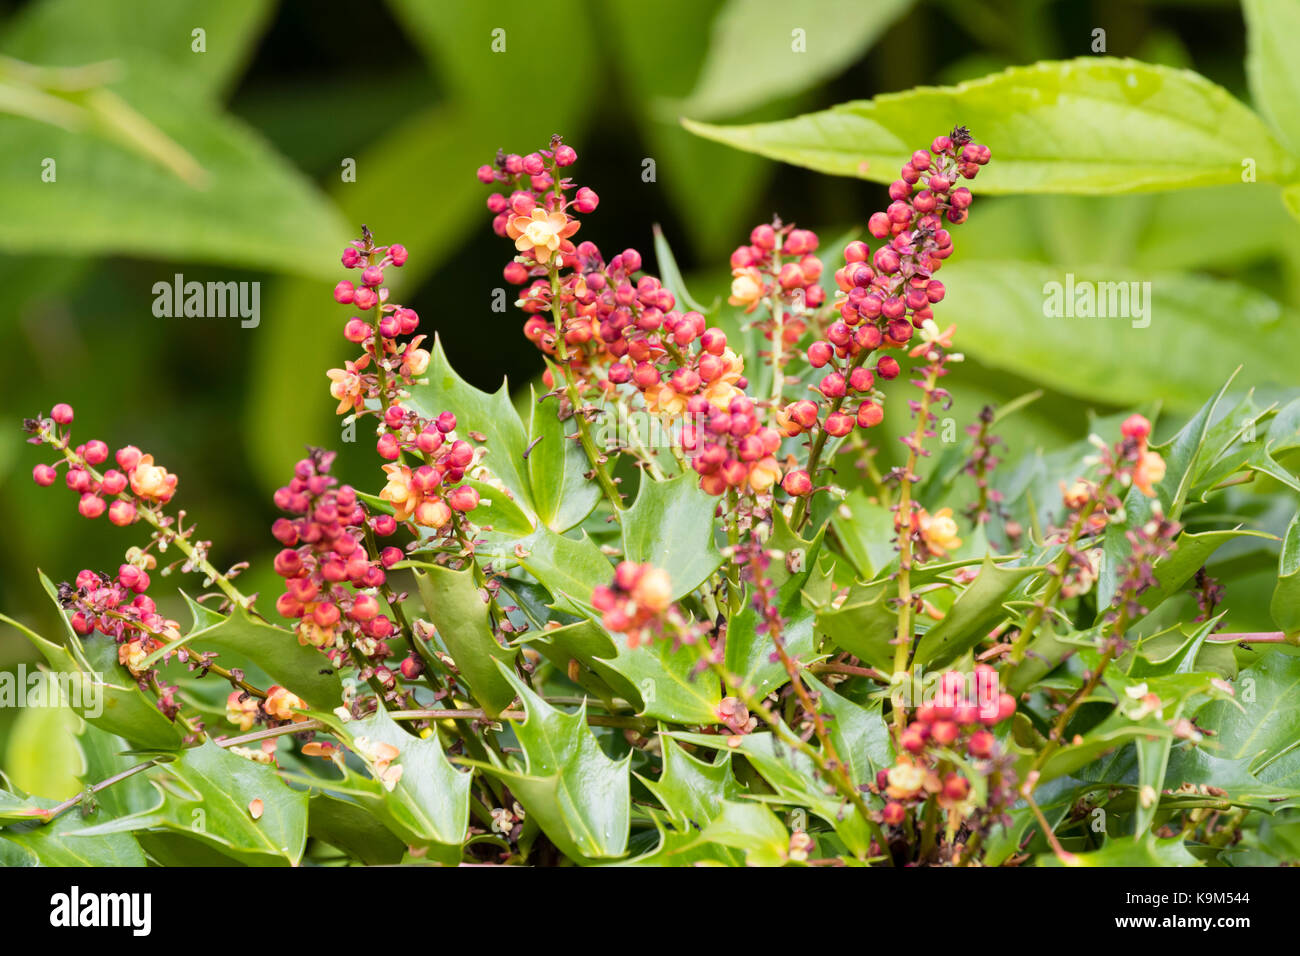 Flower spikes with red buds and yellow flowers of the evergreen, autumn to winter flowering shrub, Mahonia nitens 'Cabaret' Stock Photo